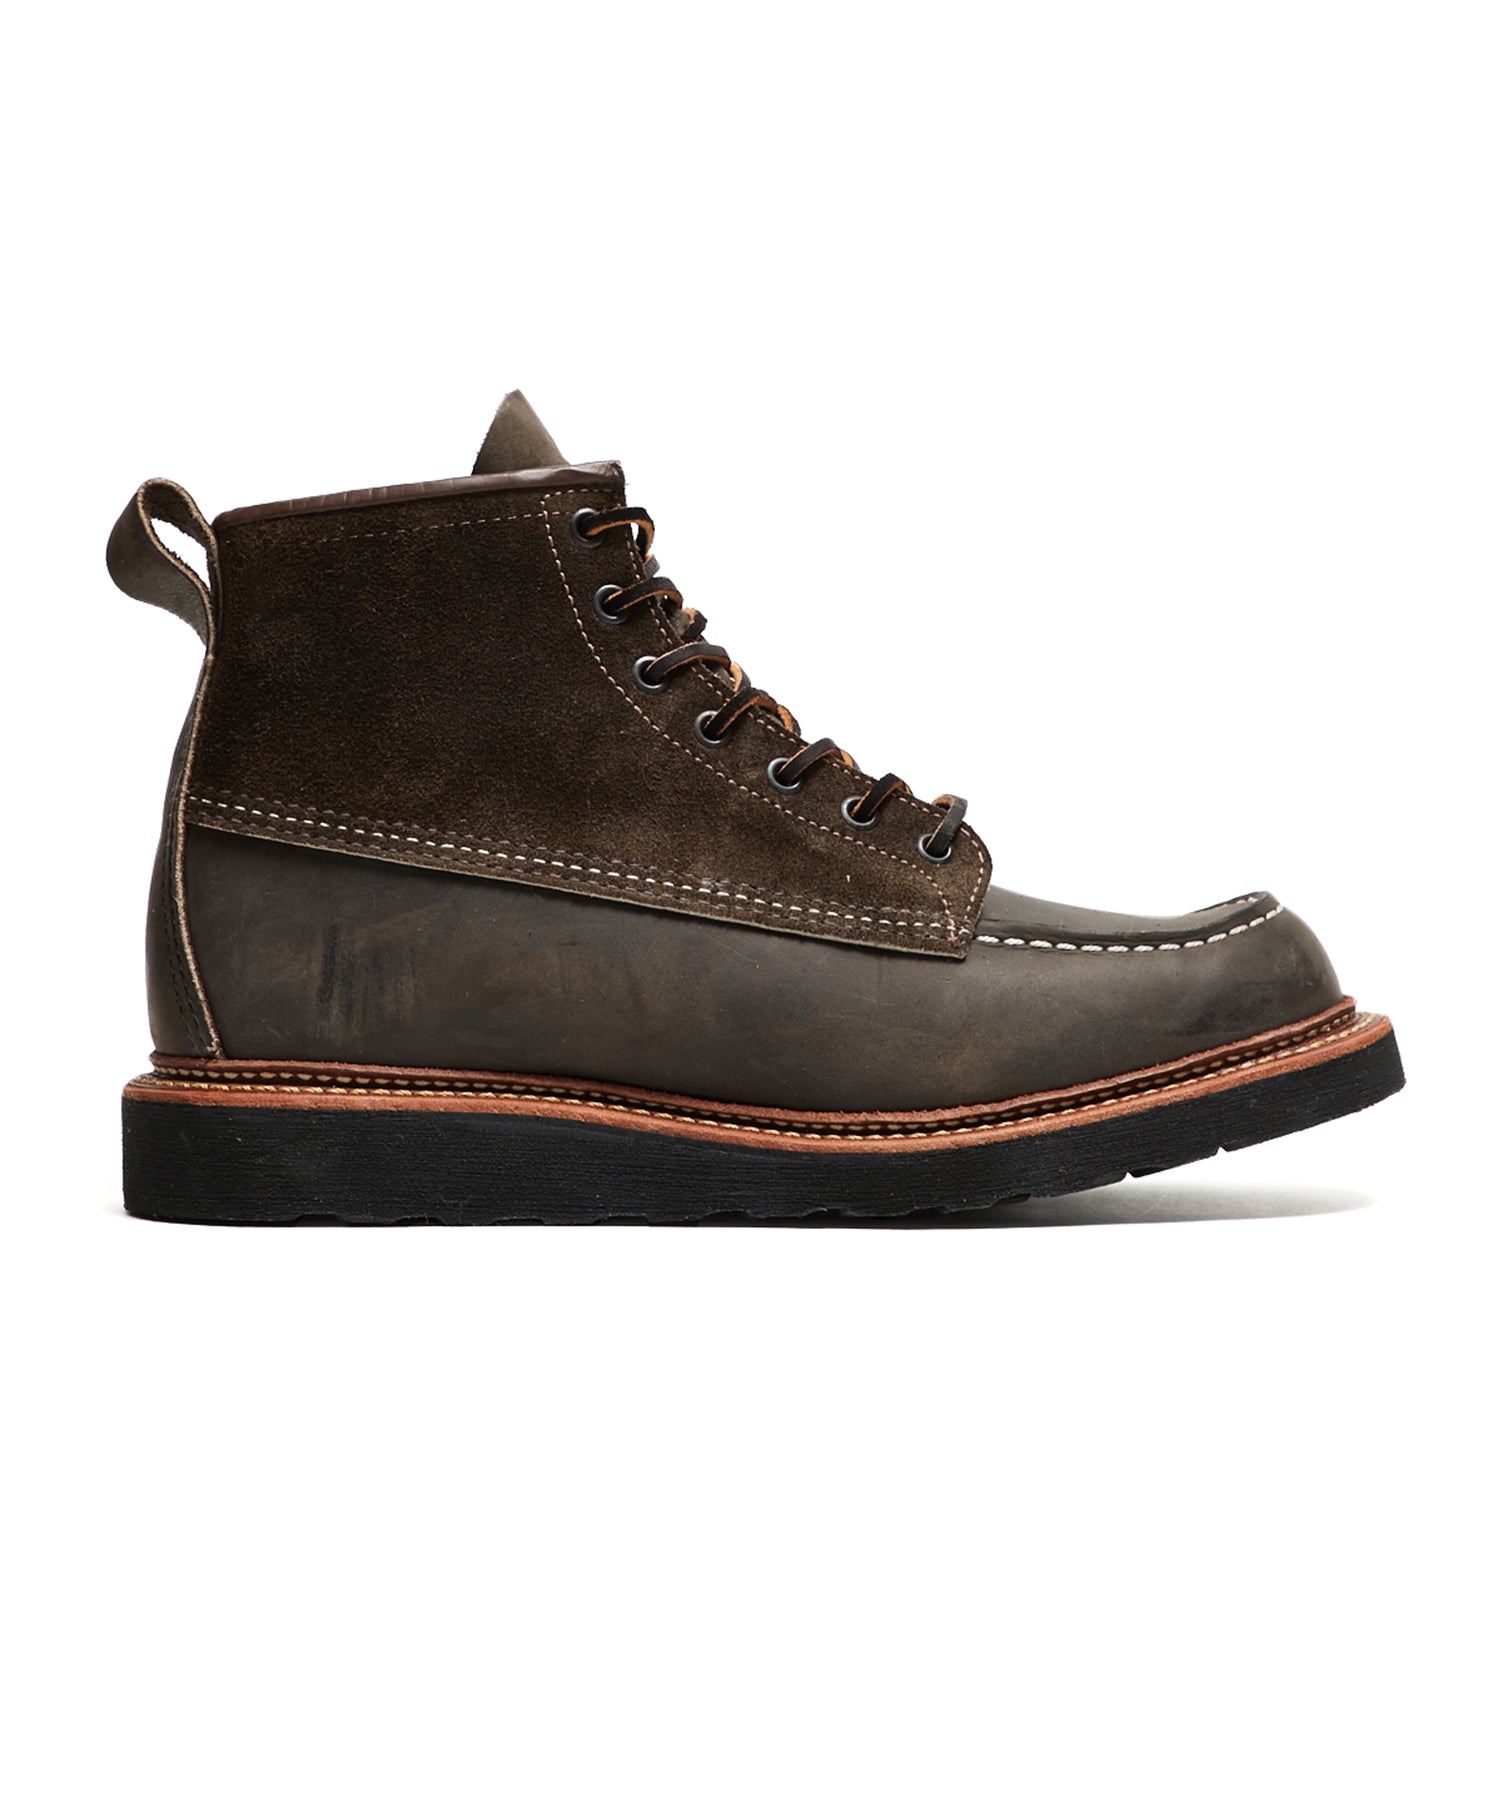 red wing boots moc toe black